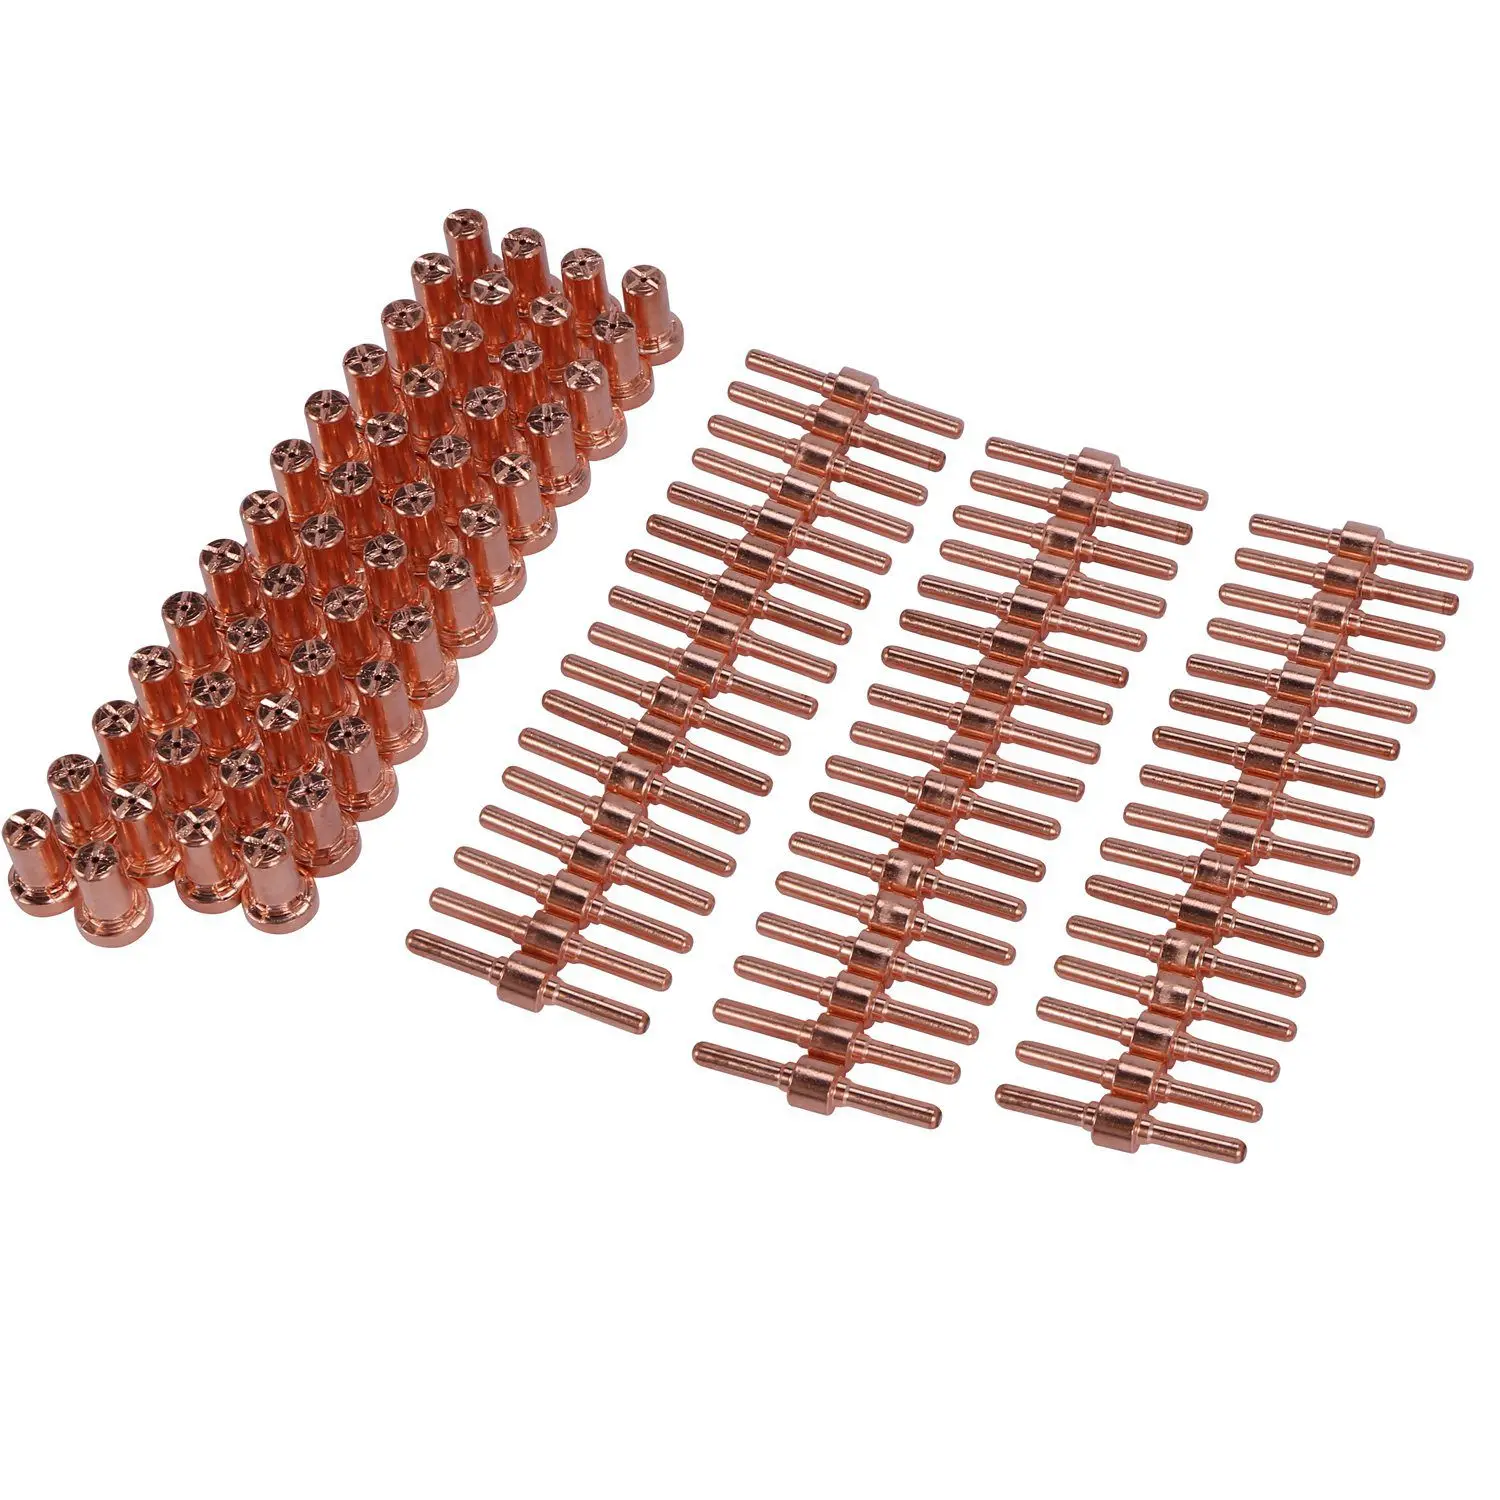 

100Pcs Red Copper Extended Long Plasma Cutter Tip Electrodes Nozzles Kit Consumable For Pt31 Lg40 40A Cutting Welder Torch